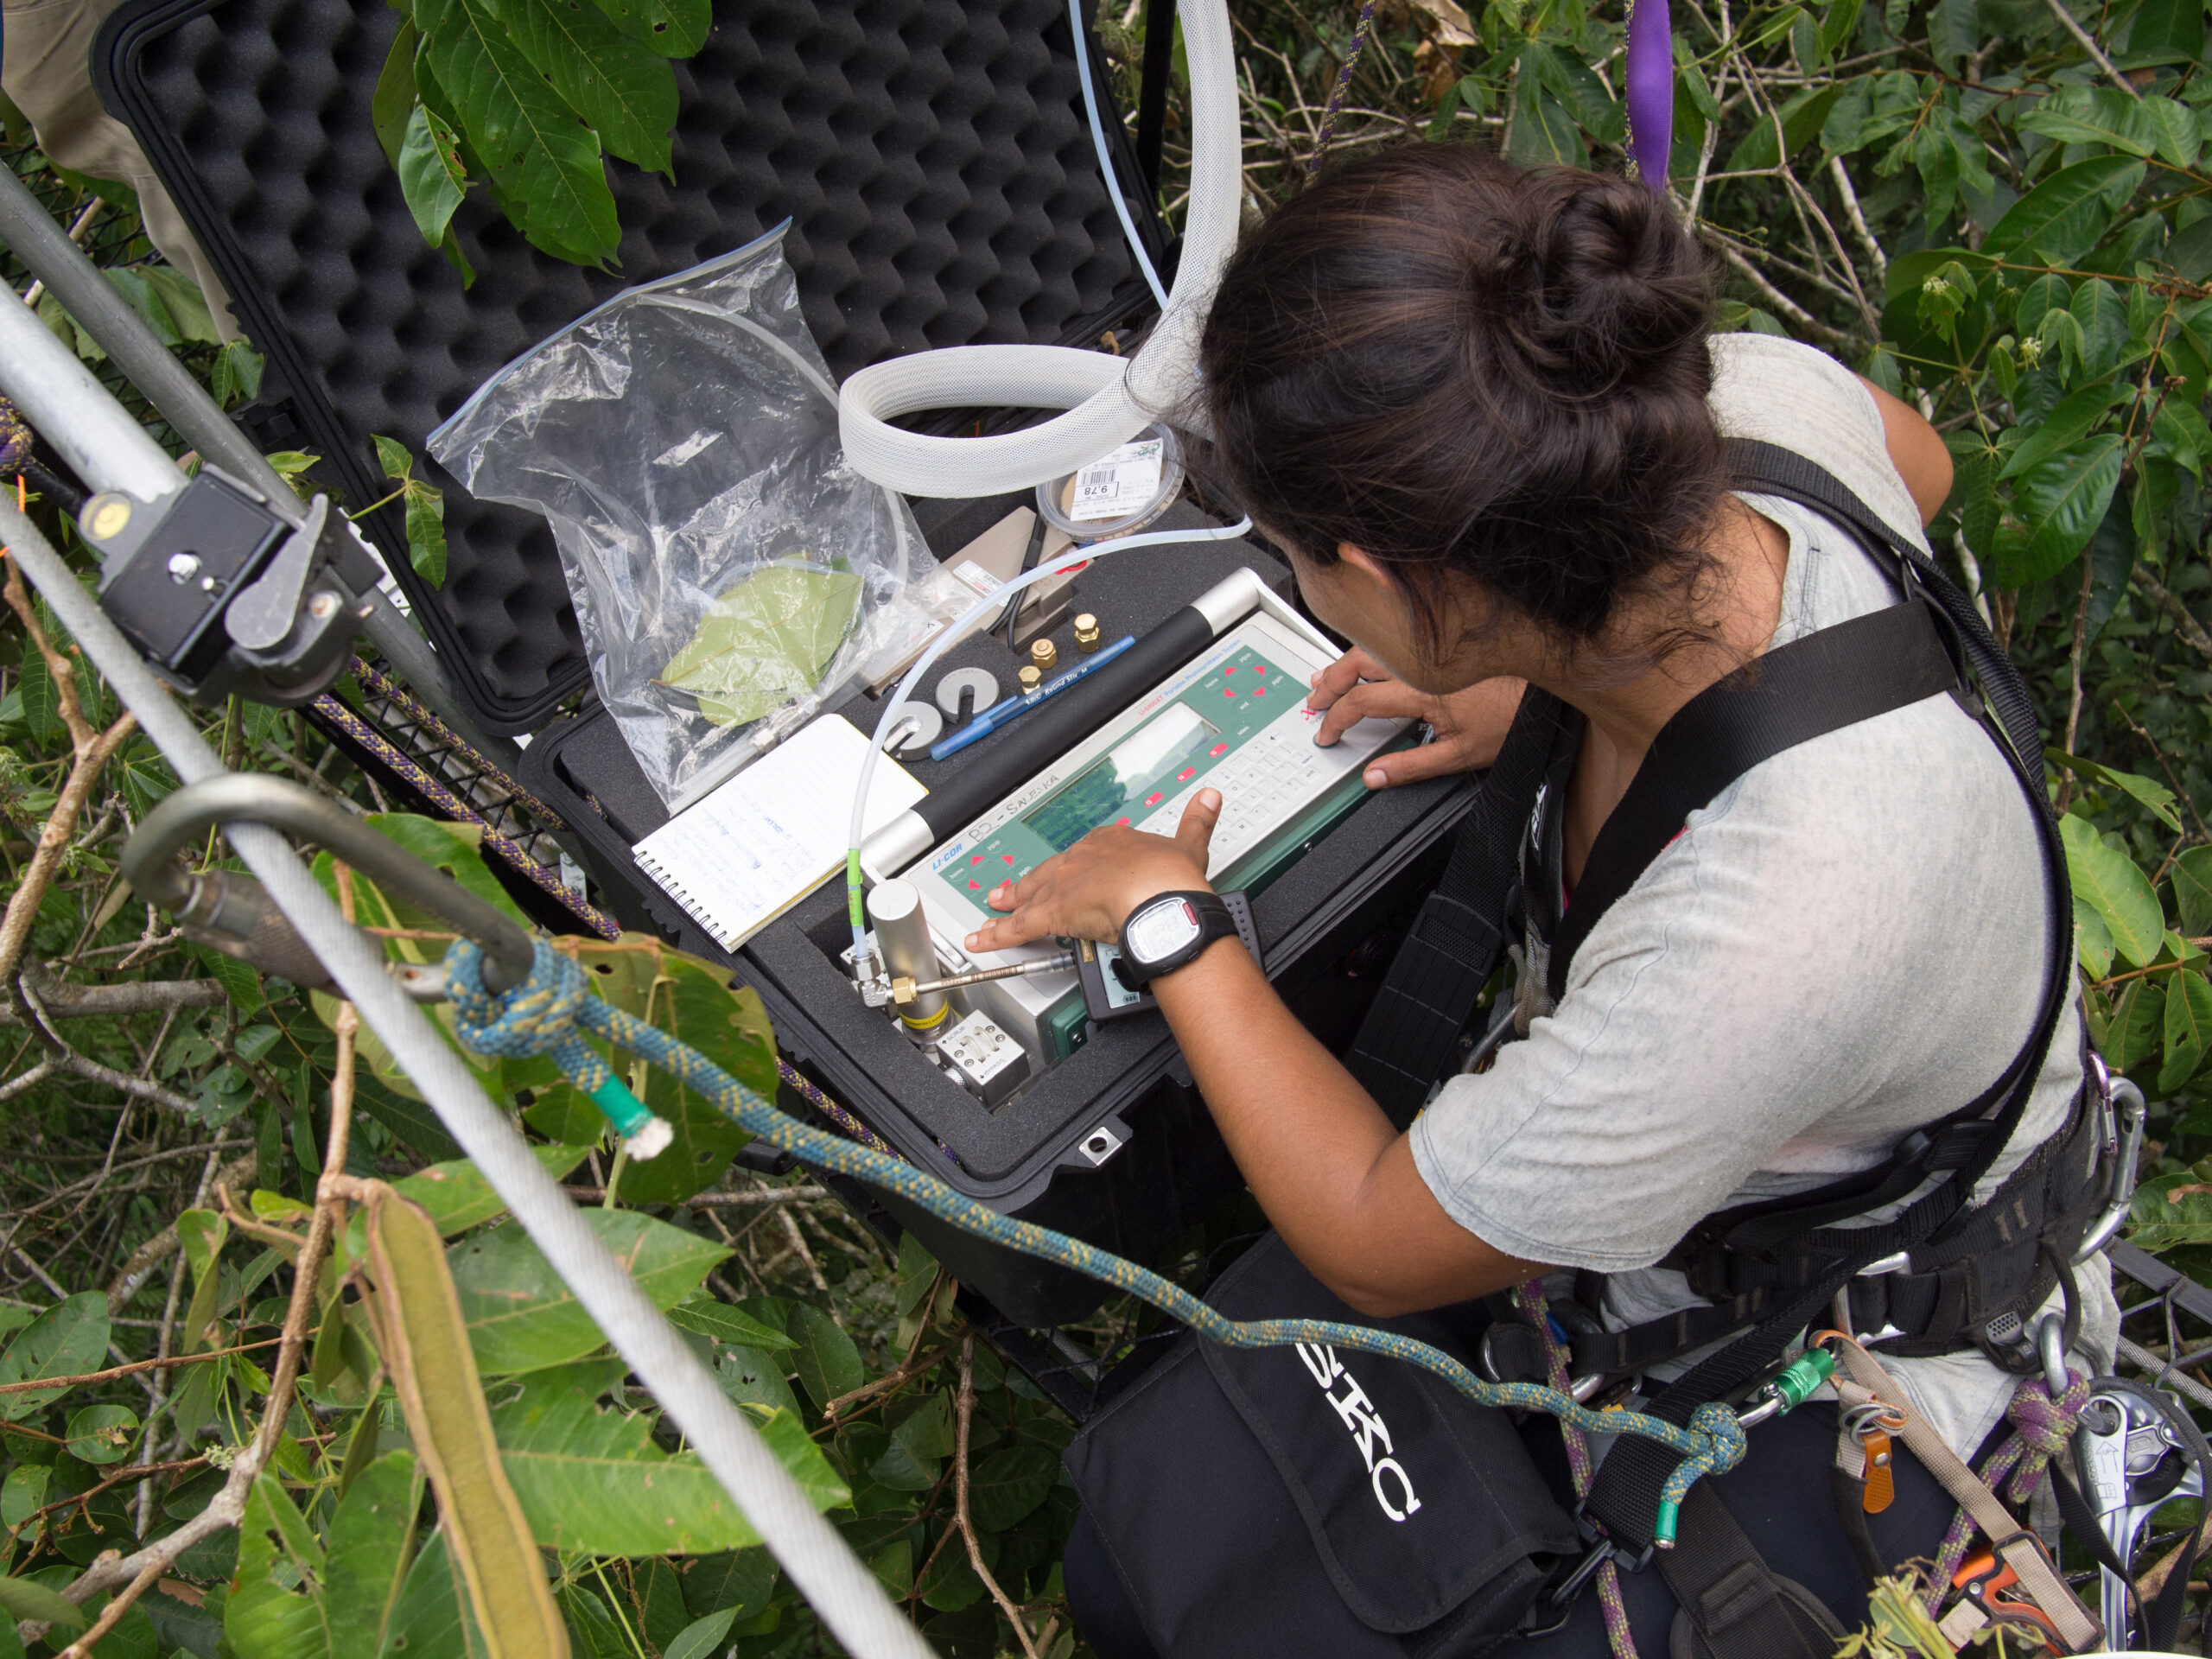 Eliane Gomes Alves measures tree emissions of isoprenoids in the forest canopy.